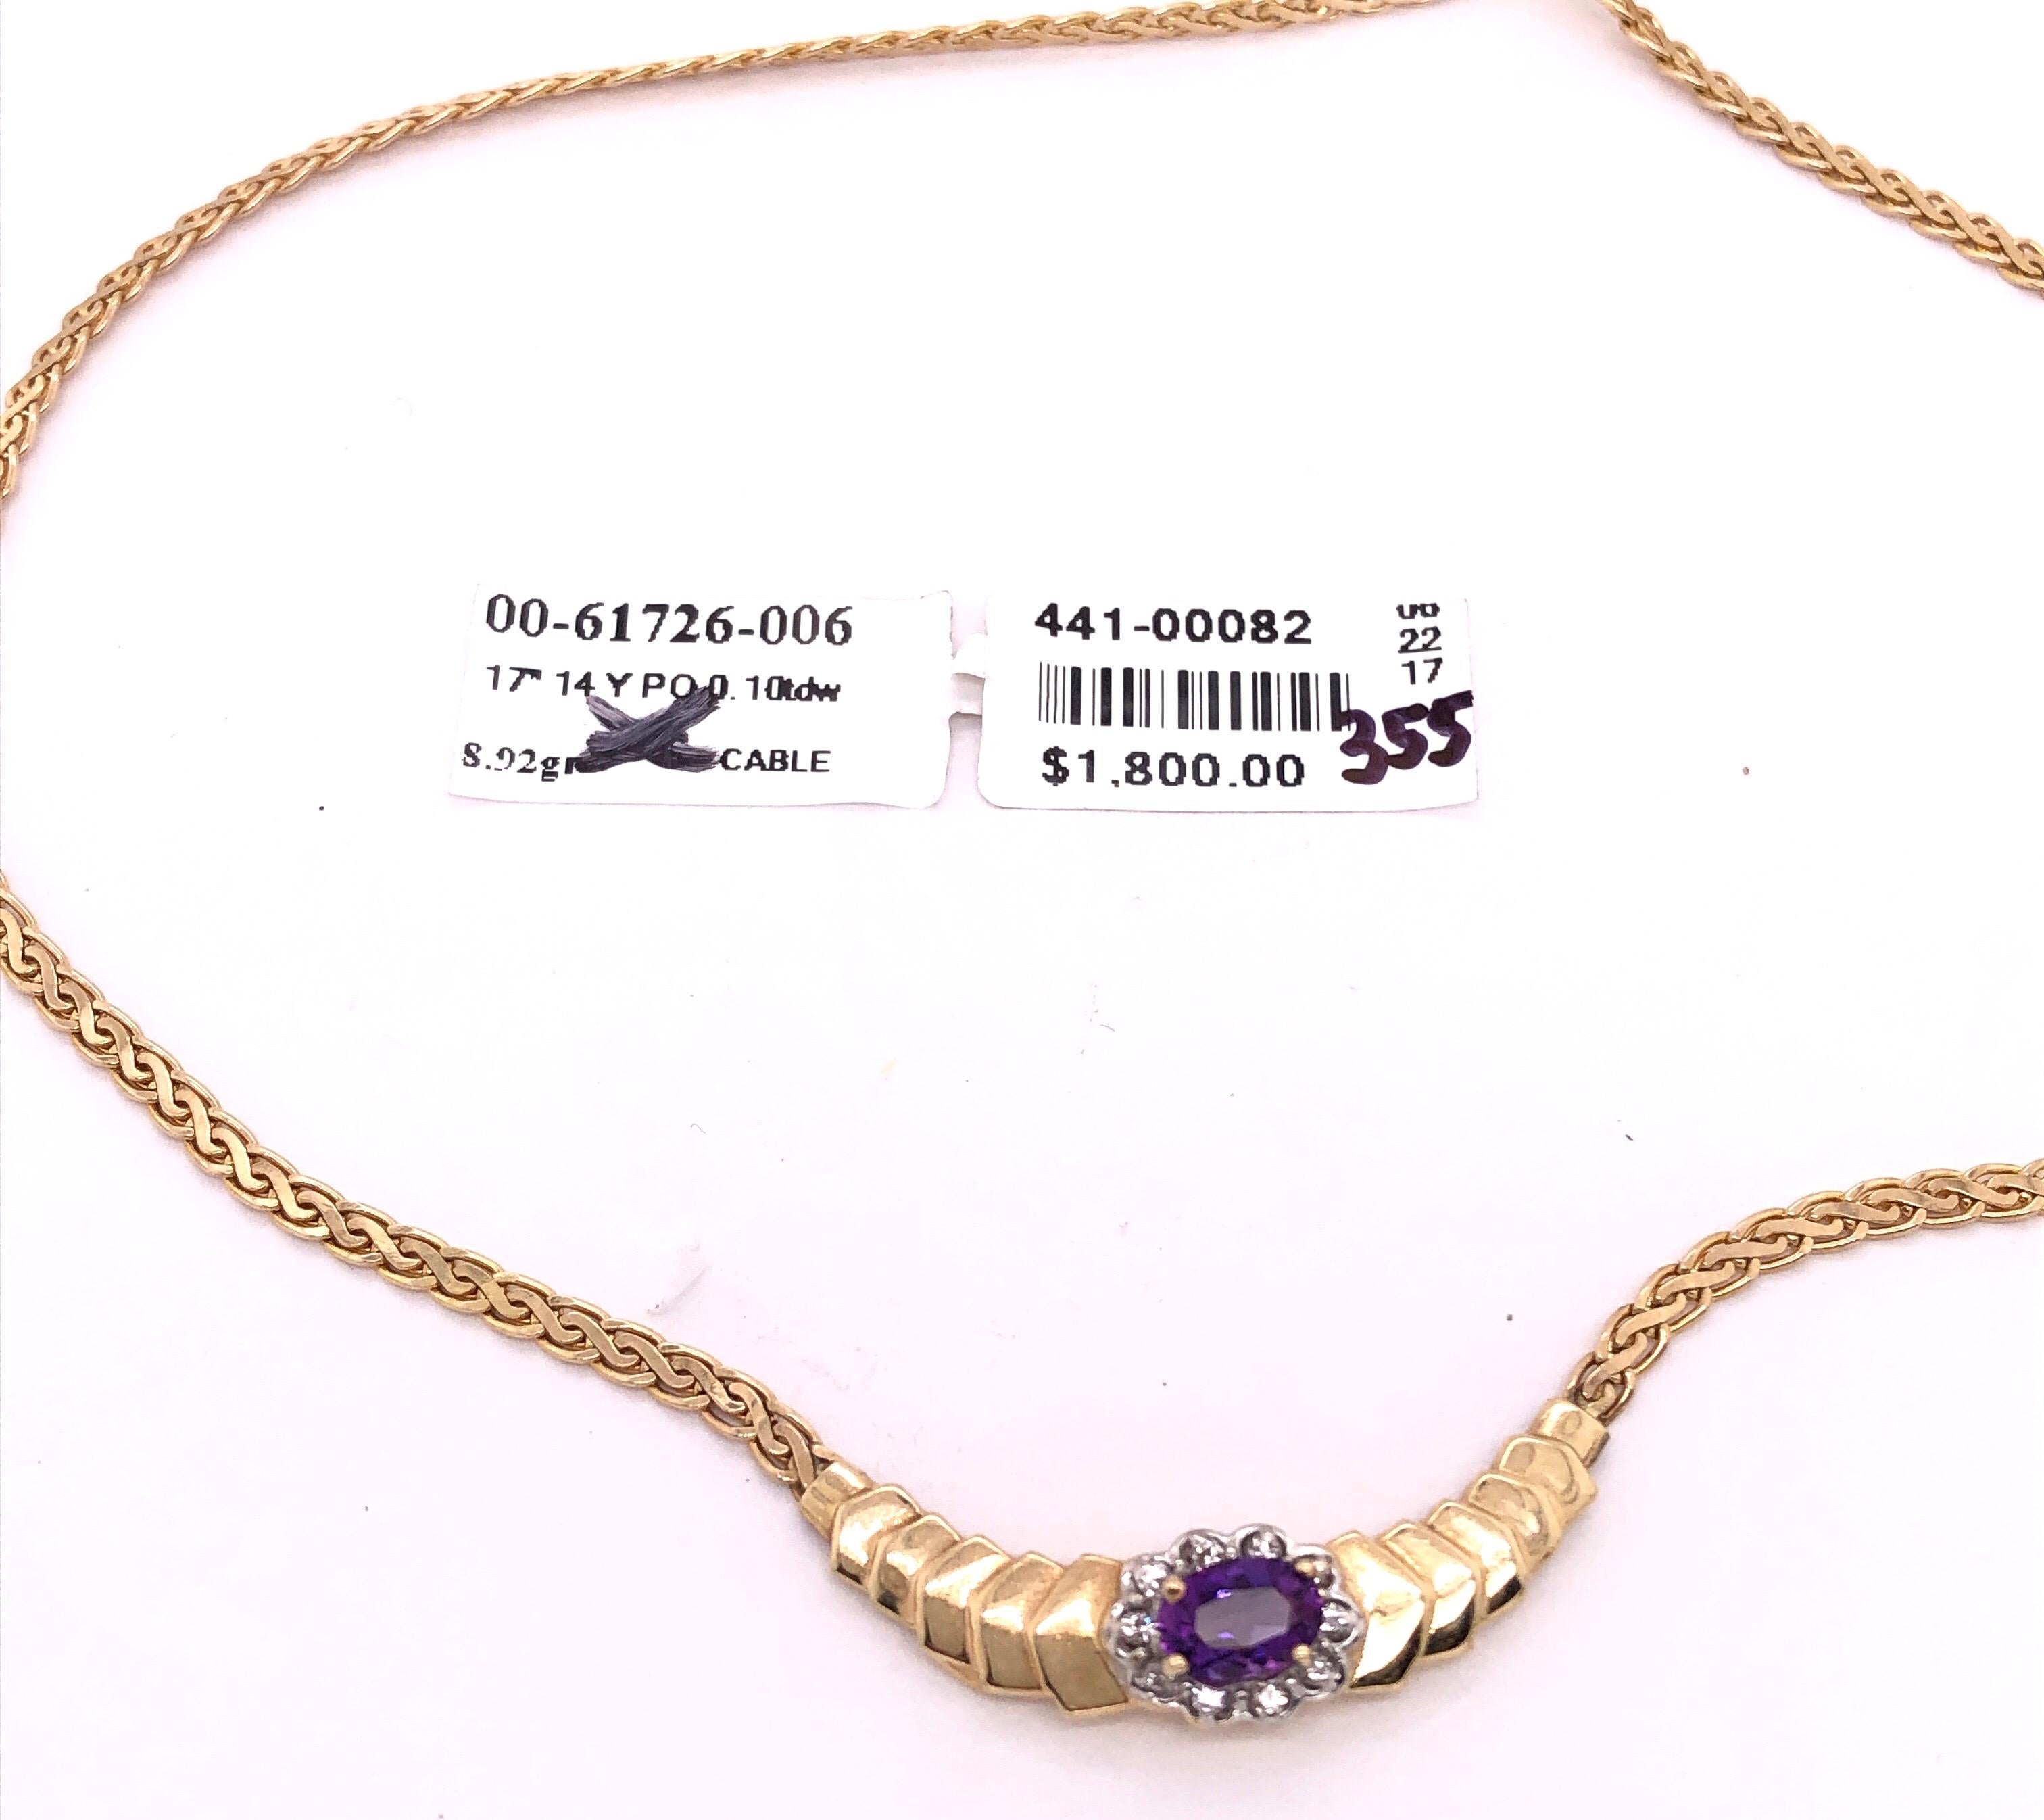 14 Karat Yellow Gold Cable Necklace 0.10 Total Diamond Weight For Sale 6